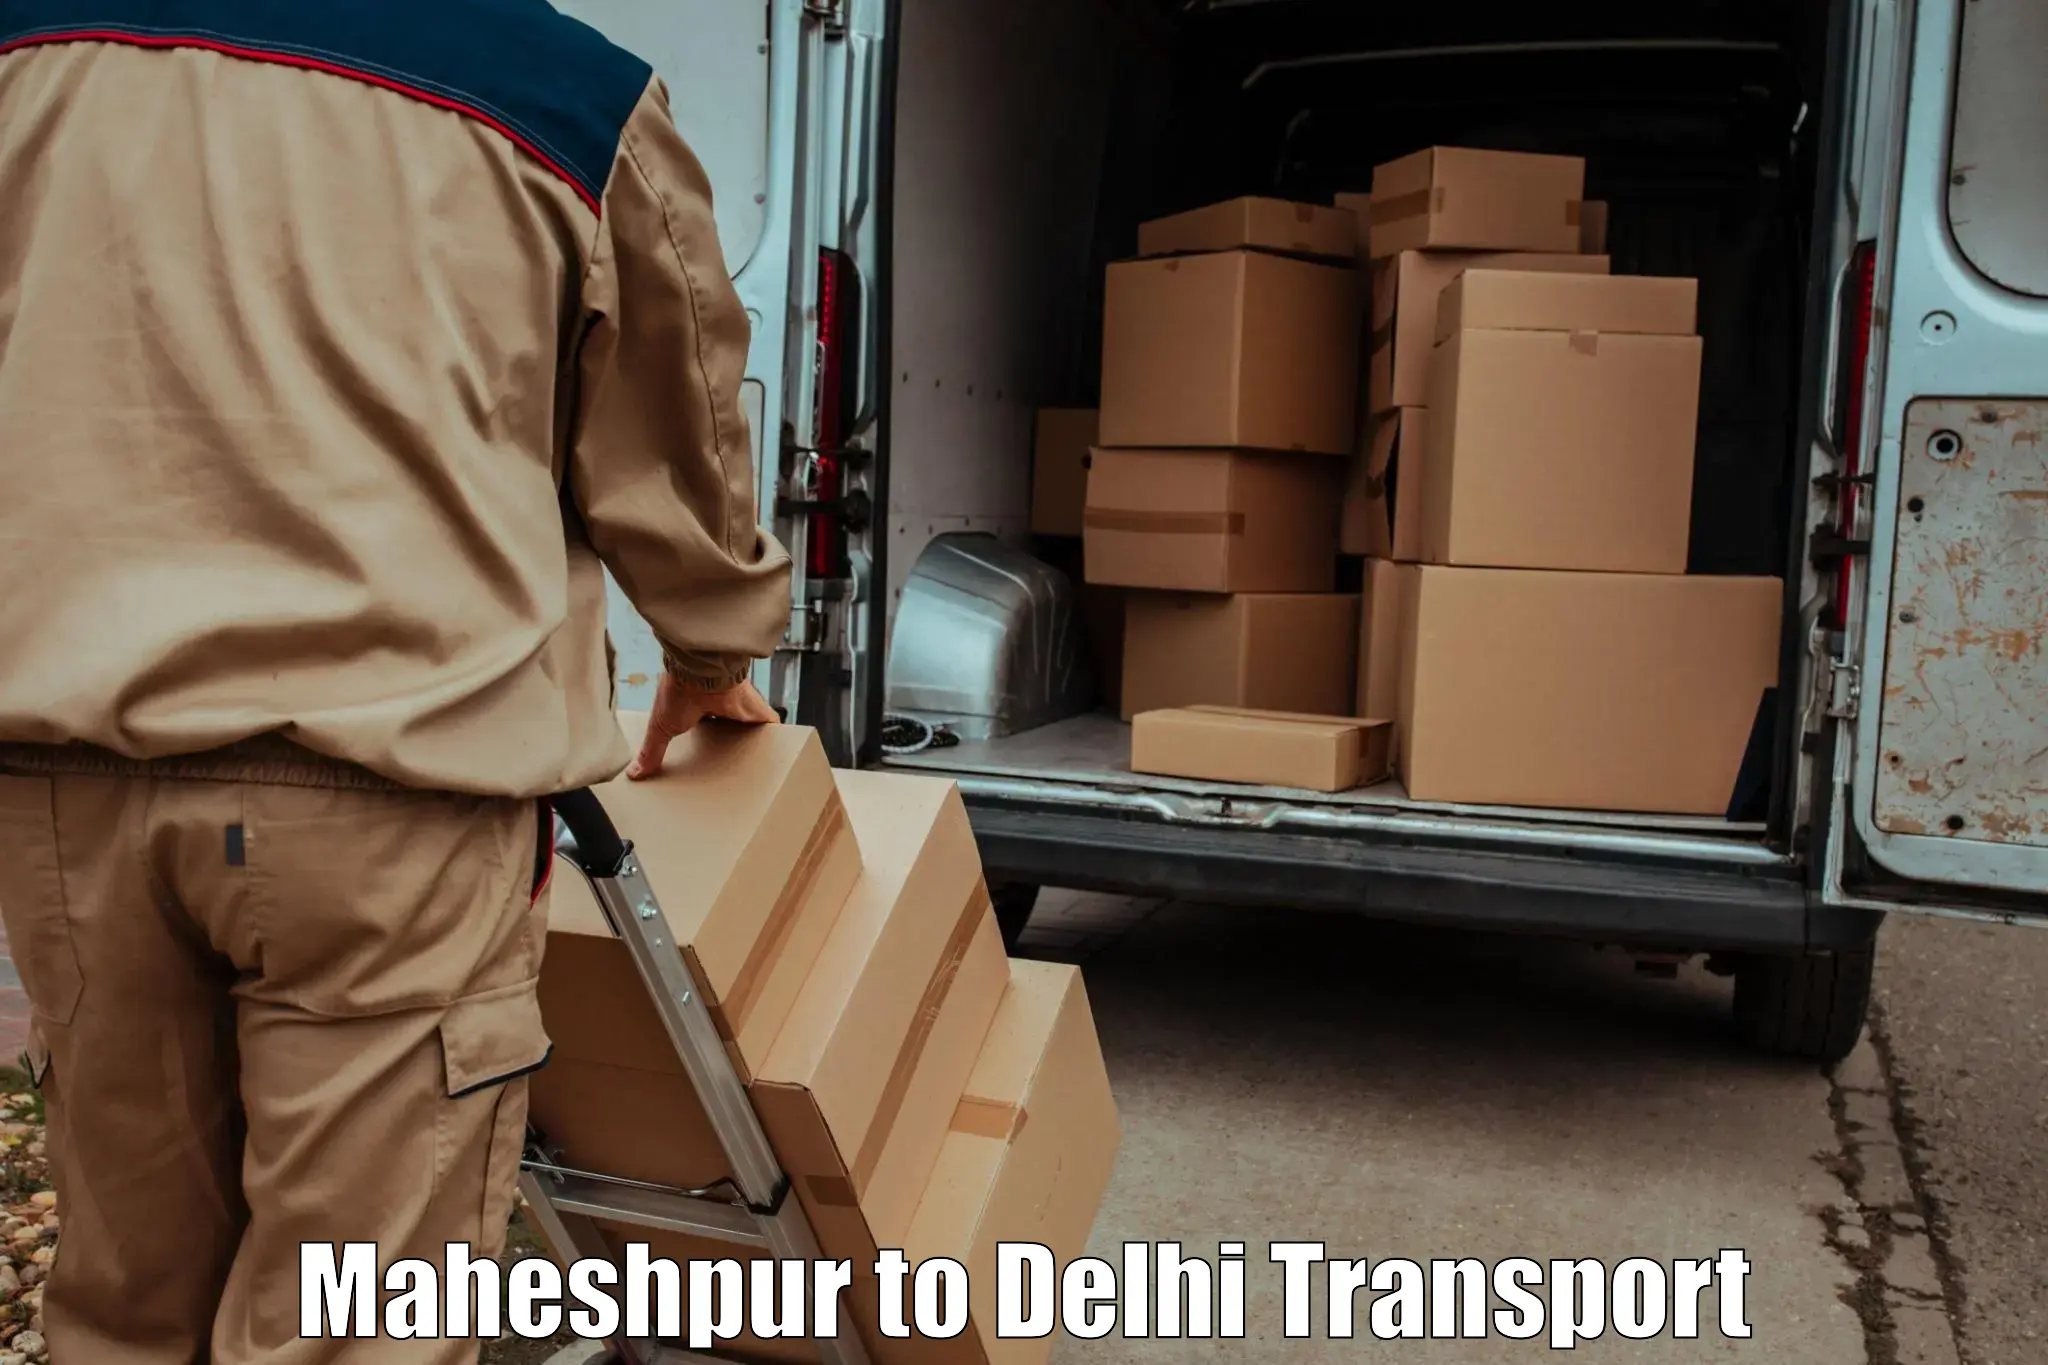 Transport bike from one state to another Maheshpur to University of Delhi